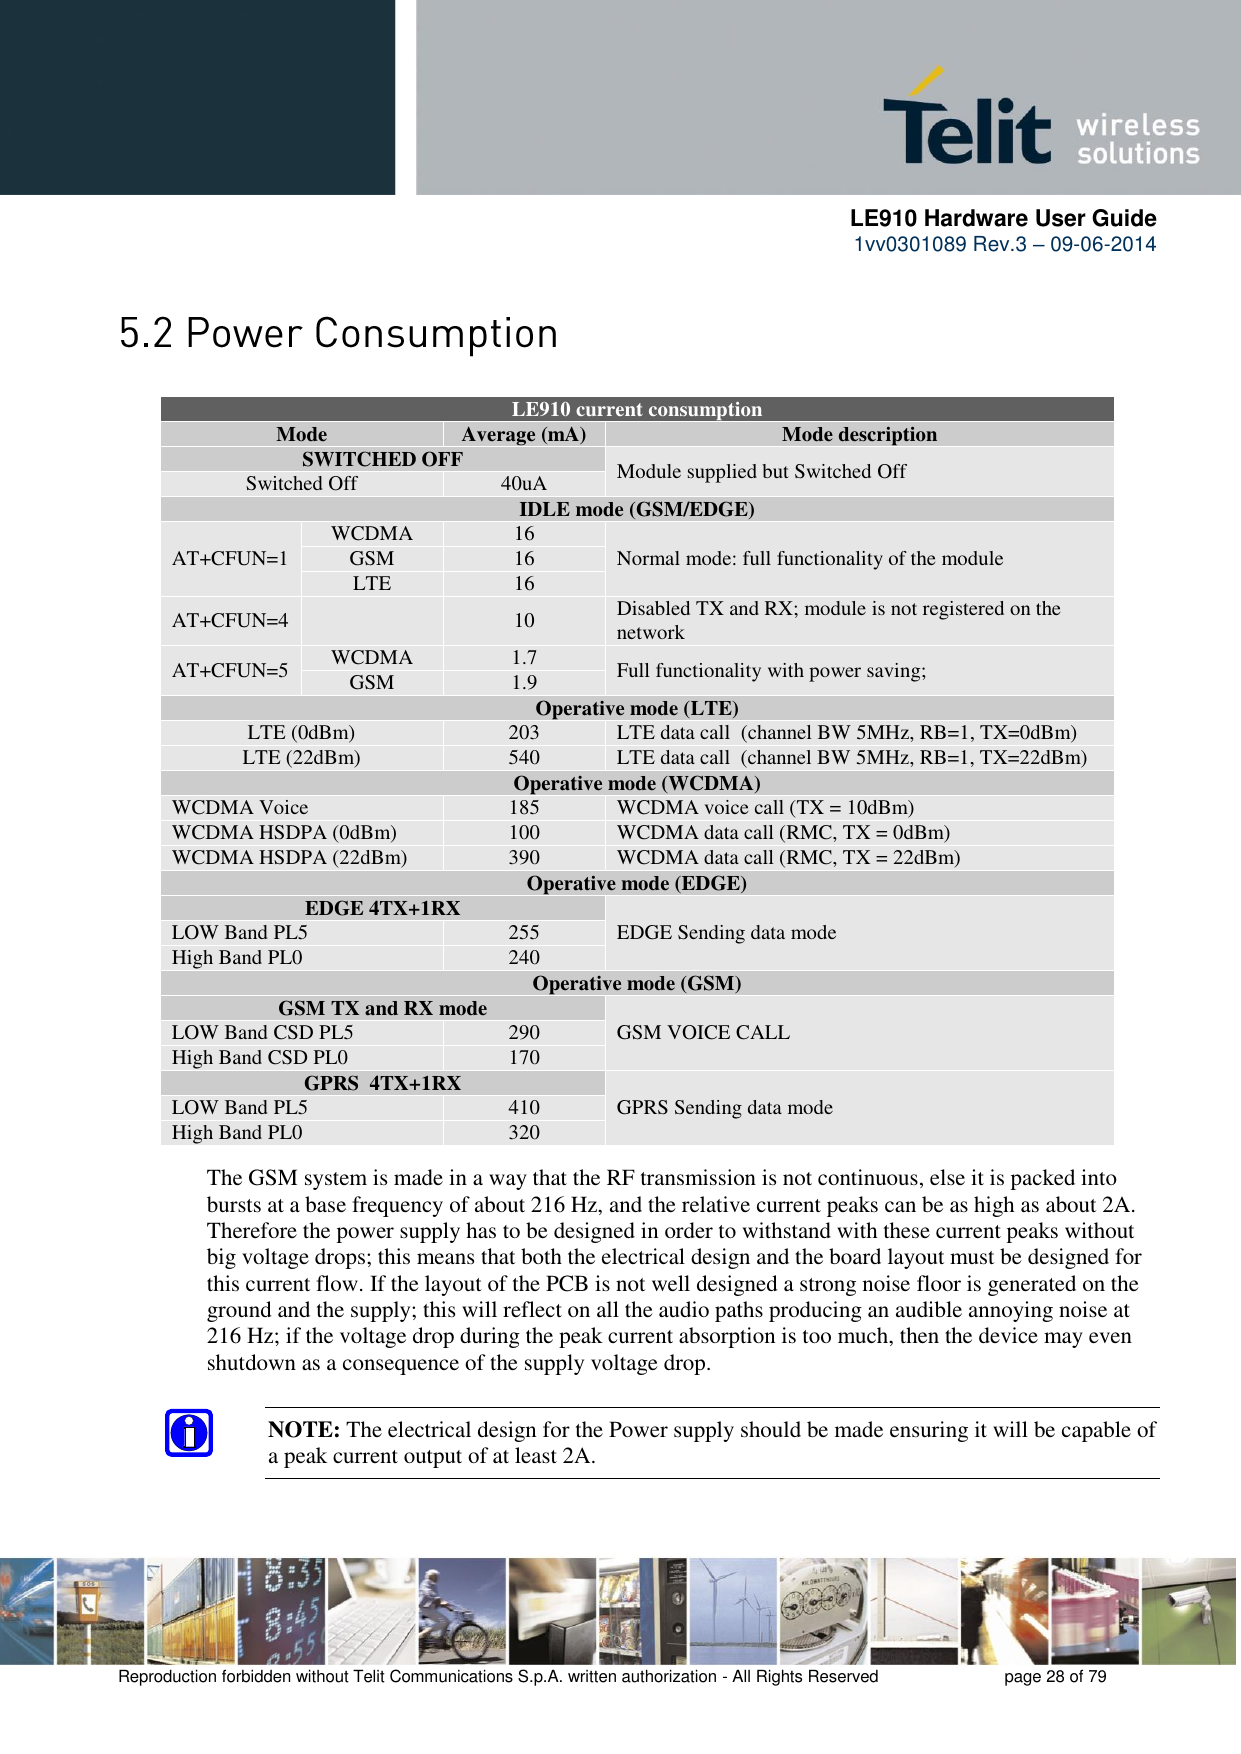      LE910 Hardware User Guide 1vv0301089 Rev.3 – 09-06-2014    Reproduction forbidden without Telit Communications S.p.A. written authorization - All Rights Reserved    page 28 of 79   LE910 current consumption Mode Average (mA) Mode description SWITCHED OFF Module supplied but Switched Off Switched Off 40uA IDLE mode (GSM/EDGE) AT+CFUN=1  WCDMA 16 Normal mode: full functionality of the module  GSM 16 LTE 16 AT+CFUN=4  10 Disabled TX and RX; module is not registered on the network AT+CFUN=5 WCDMA 1.7 Full functionality with power saving; GSM 1.9 Operative mode (LTE) LTE (0dBm) 203 LTE data call  (channel BW 5MHz, RB=1, TX=0dBm) LTE (22dBm) 540 LTE data call  (channel BW 5MHz, RB=1, TX=22dBm) Operative mode (WCDMA) WCDMA Voice 185 WCDMA voice call (TX = 10dBm) WCDMA HSDPA (0dBm) 100 WCDMA data call (RMC, TX = 0dBm) WCDMA HSDPA (22dBm) 390 WCDMA data call (RMC, TX = 22dBm) Operative mode (EDGE) EDGE 4TX+1RX EDGE Sending data mode LOW Band PL5 255 High Band PL0 240 Operative mode (GSM) GSM TX and RX mode GSM VOICE CALL LOW Band CSD PL5 290 High Band CSD PL0 170 GPRS  4TX+1RX GPRS Sending data mode LOW Band PL5 410 High Band PL0 320  The GSM system is made in a way that the RF transmission is not continuous, else it is packed into bursts at a base frequency of about 216 Hz, and the relative current peaks can be as high as about 2A. Therefore the power supply has to be designed in order to withstand with these current peaks without big voltage drops; this means that both the electrical design and the board layout must be designed for this current flow. If the layout of the PCB is not well designed a strong noise floor is generated on the ground and the supply; this will reflect on all the audio paths producing an audible annoying noise at 216 Hz; if the voltage drop during the peak current absorption is too much, then the device may even shutdown as a consequence of the supply voltage drop.  NOTE: The electrical design for the Power supply should be made ensuring it will be capable of a peak current output of at least 2A. 